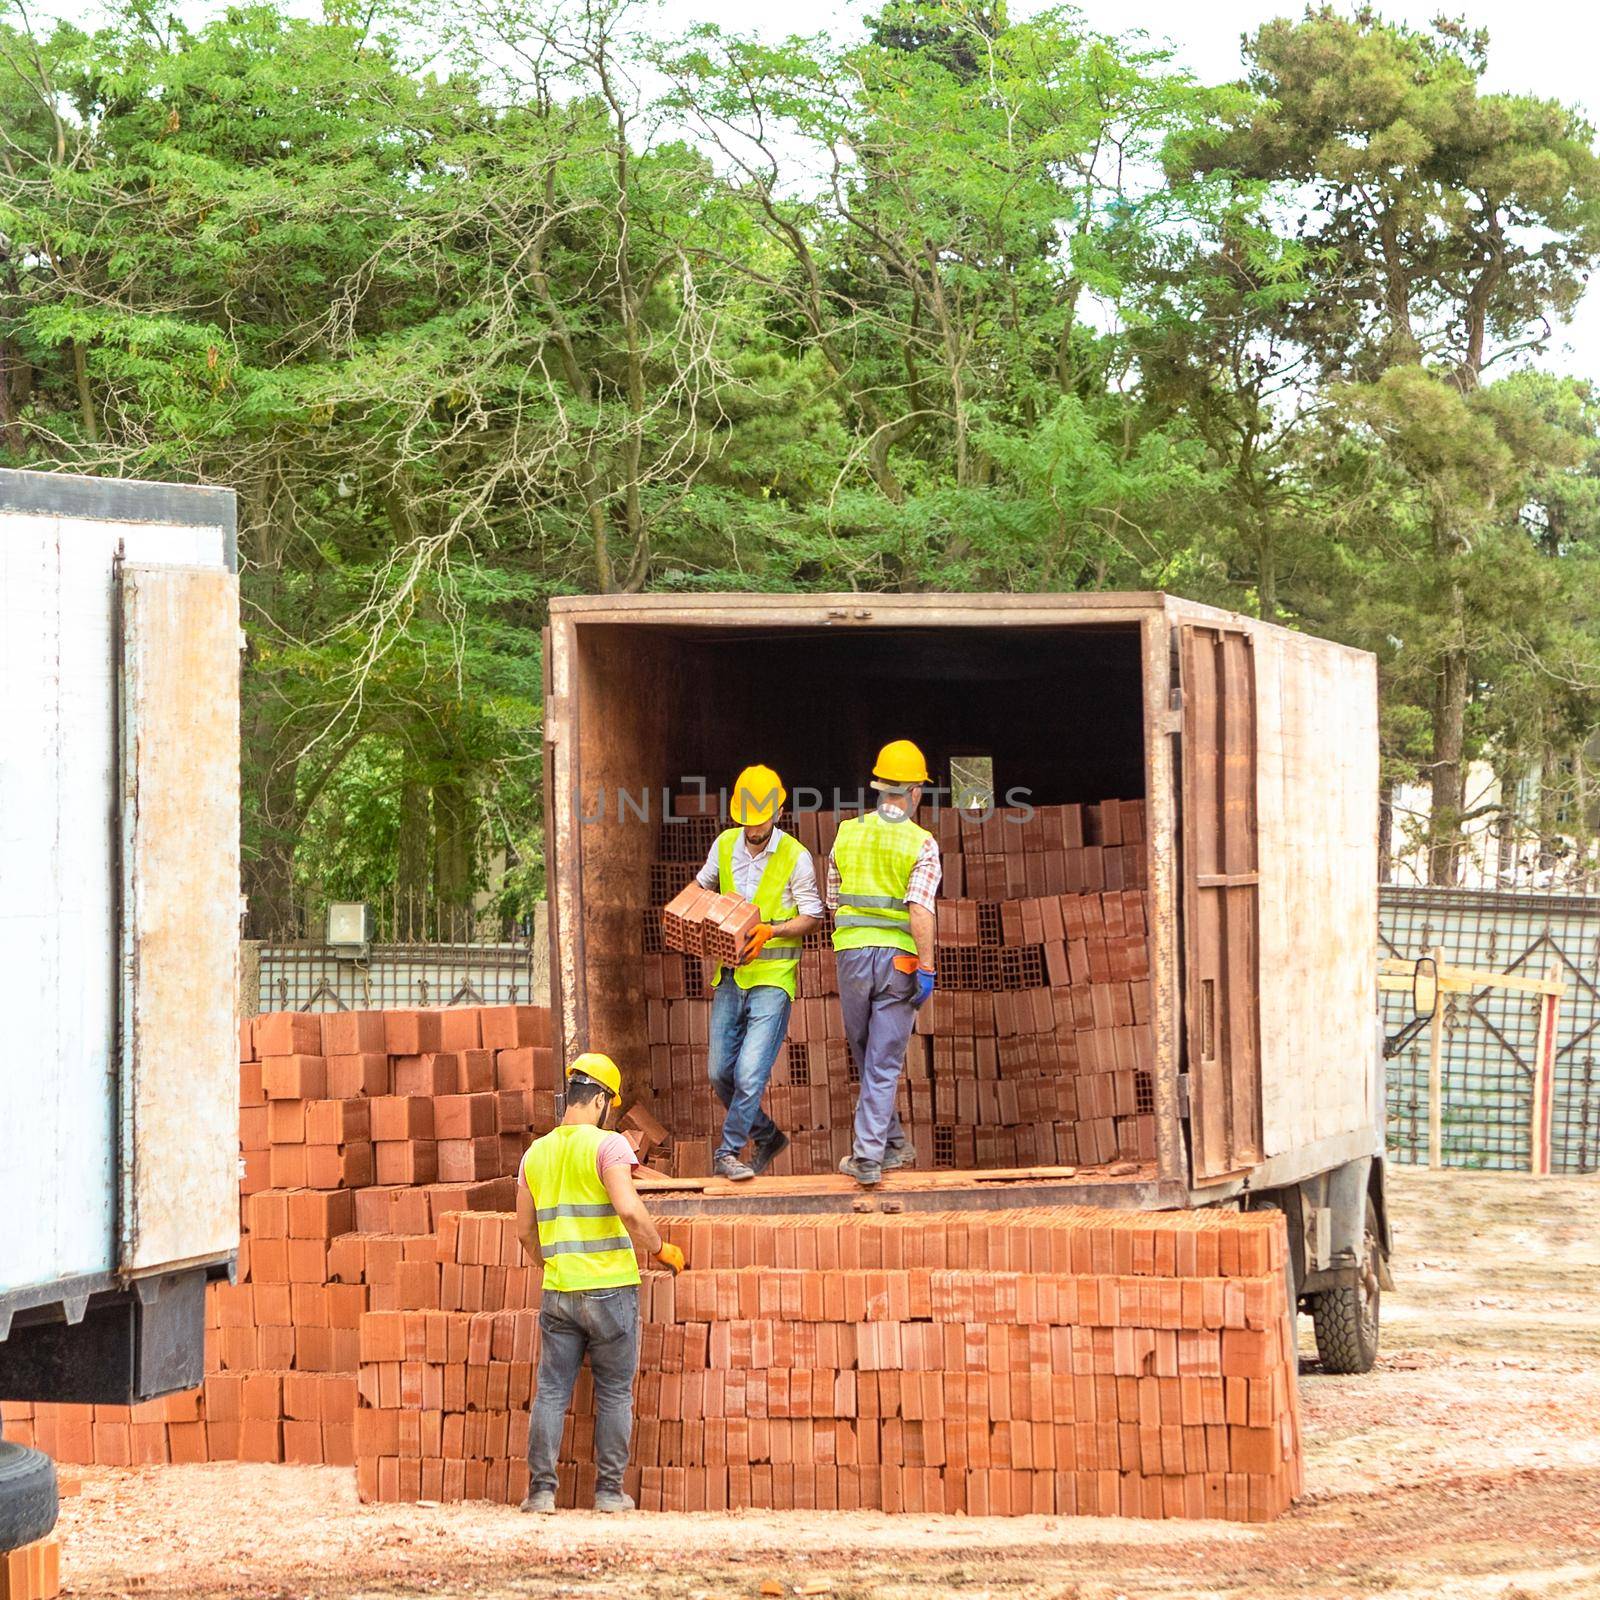 Construction workers unloading bricks by ferhad